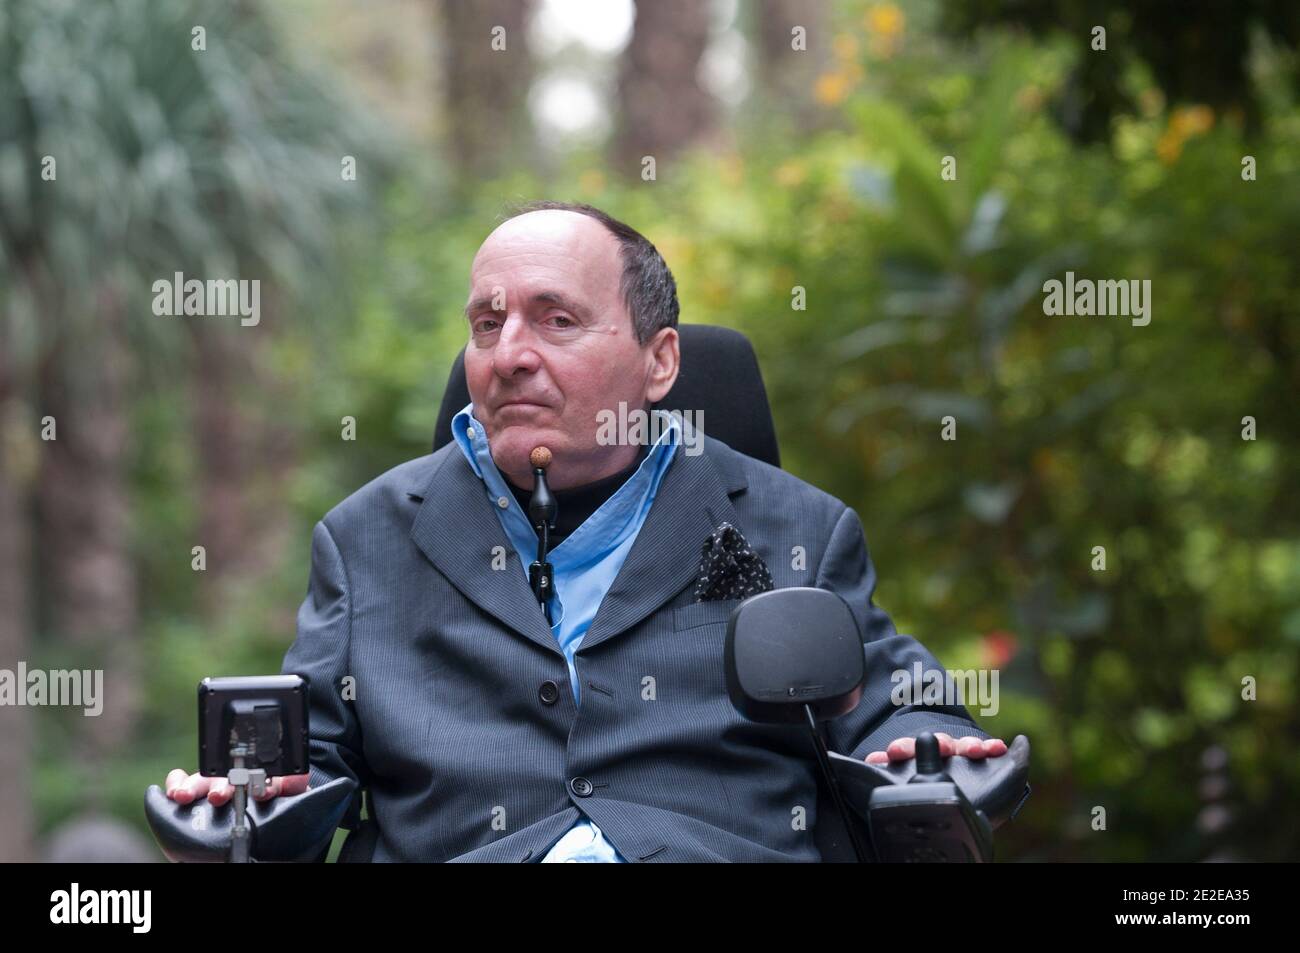 EXCLUSIVE - Philippe Pozzo di Borgo, who became quadriplegic after a paragliding accident in 1993, poses in Marakkech, Morocco, November 13, 2011. His story inspired the movie 'Intouchables' directed by Olivier Nakache and Eric Toledano, released in France on November 2011, in which the actor Francois Cluzet plays his role and actor Omar Sy plays Abdel Seliou's role. In France, the movie reached 10 million of filmgoers. Photo by William Stevens/ABACAPRESS.COM Stock Photo